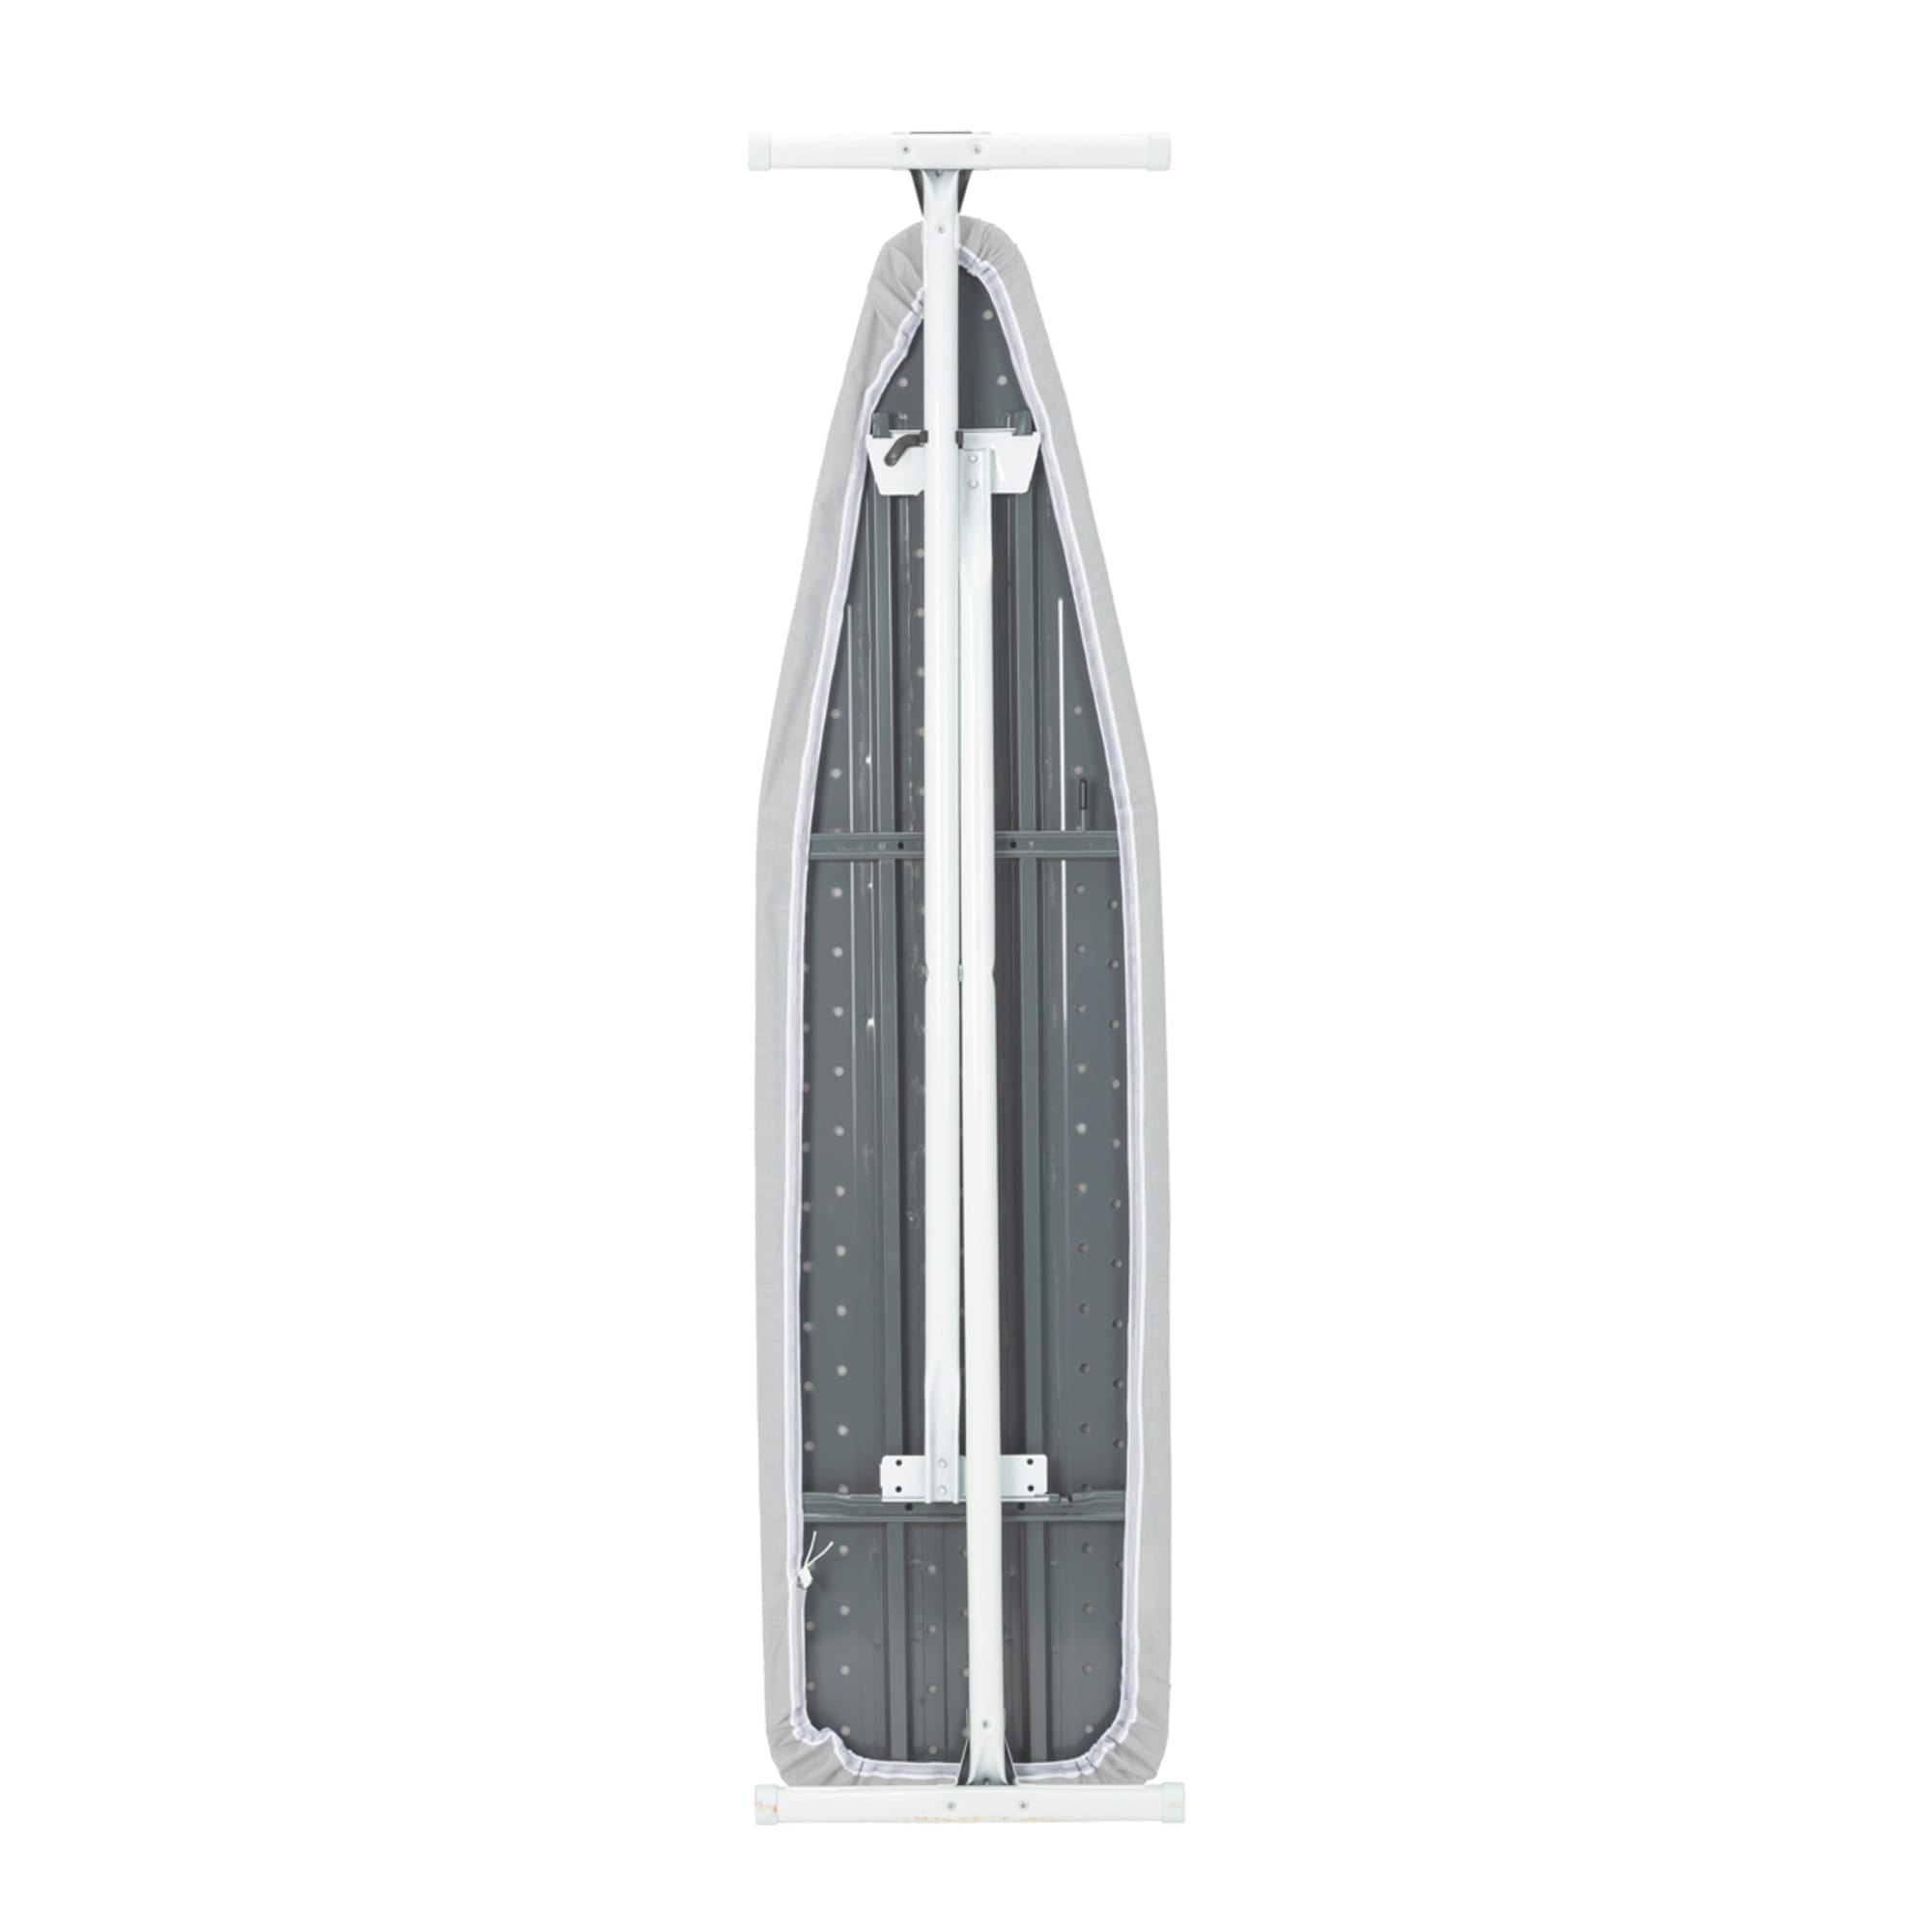 Seymour Home Products Adjustable Height, T-Leg Ironing Board With Perforated Top, Space Gray (4 Pack) $25.00 EACH, CASE PACK OF 4